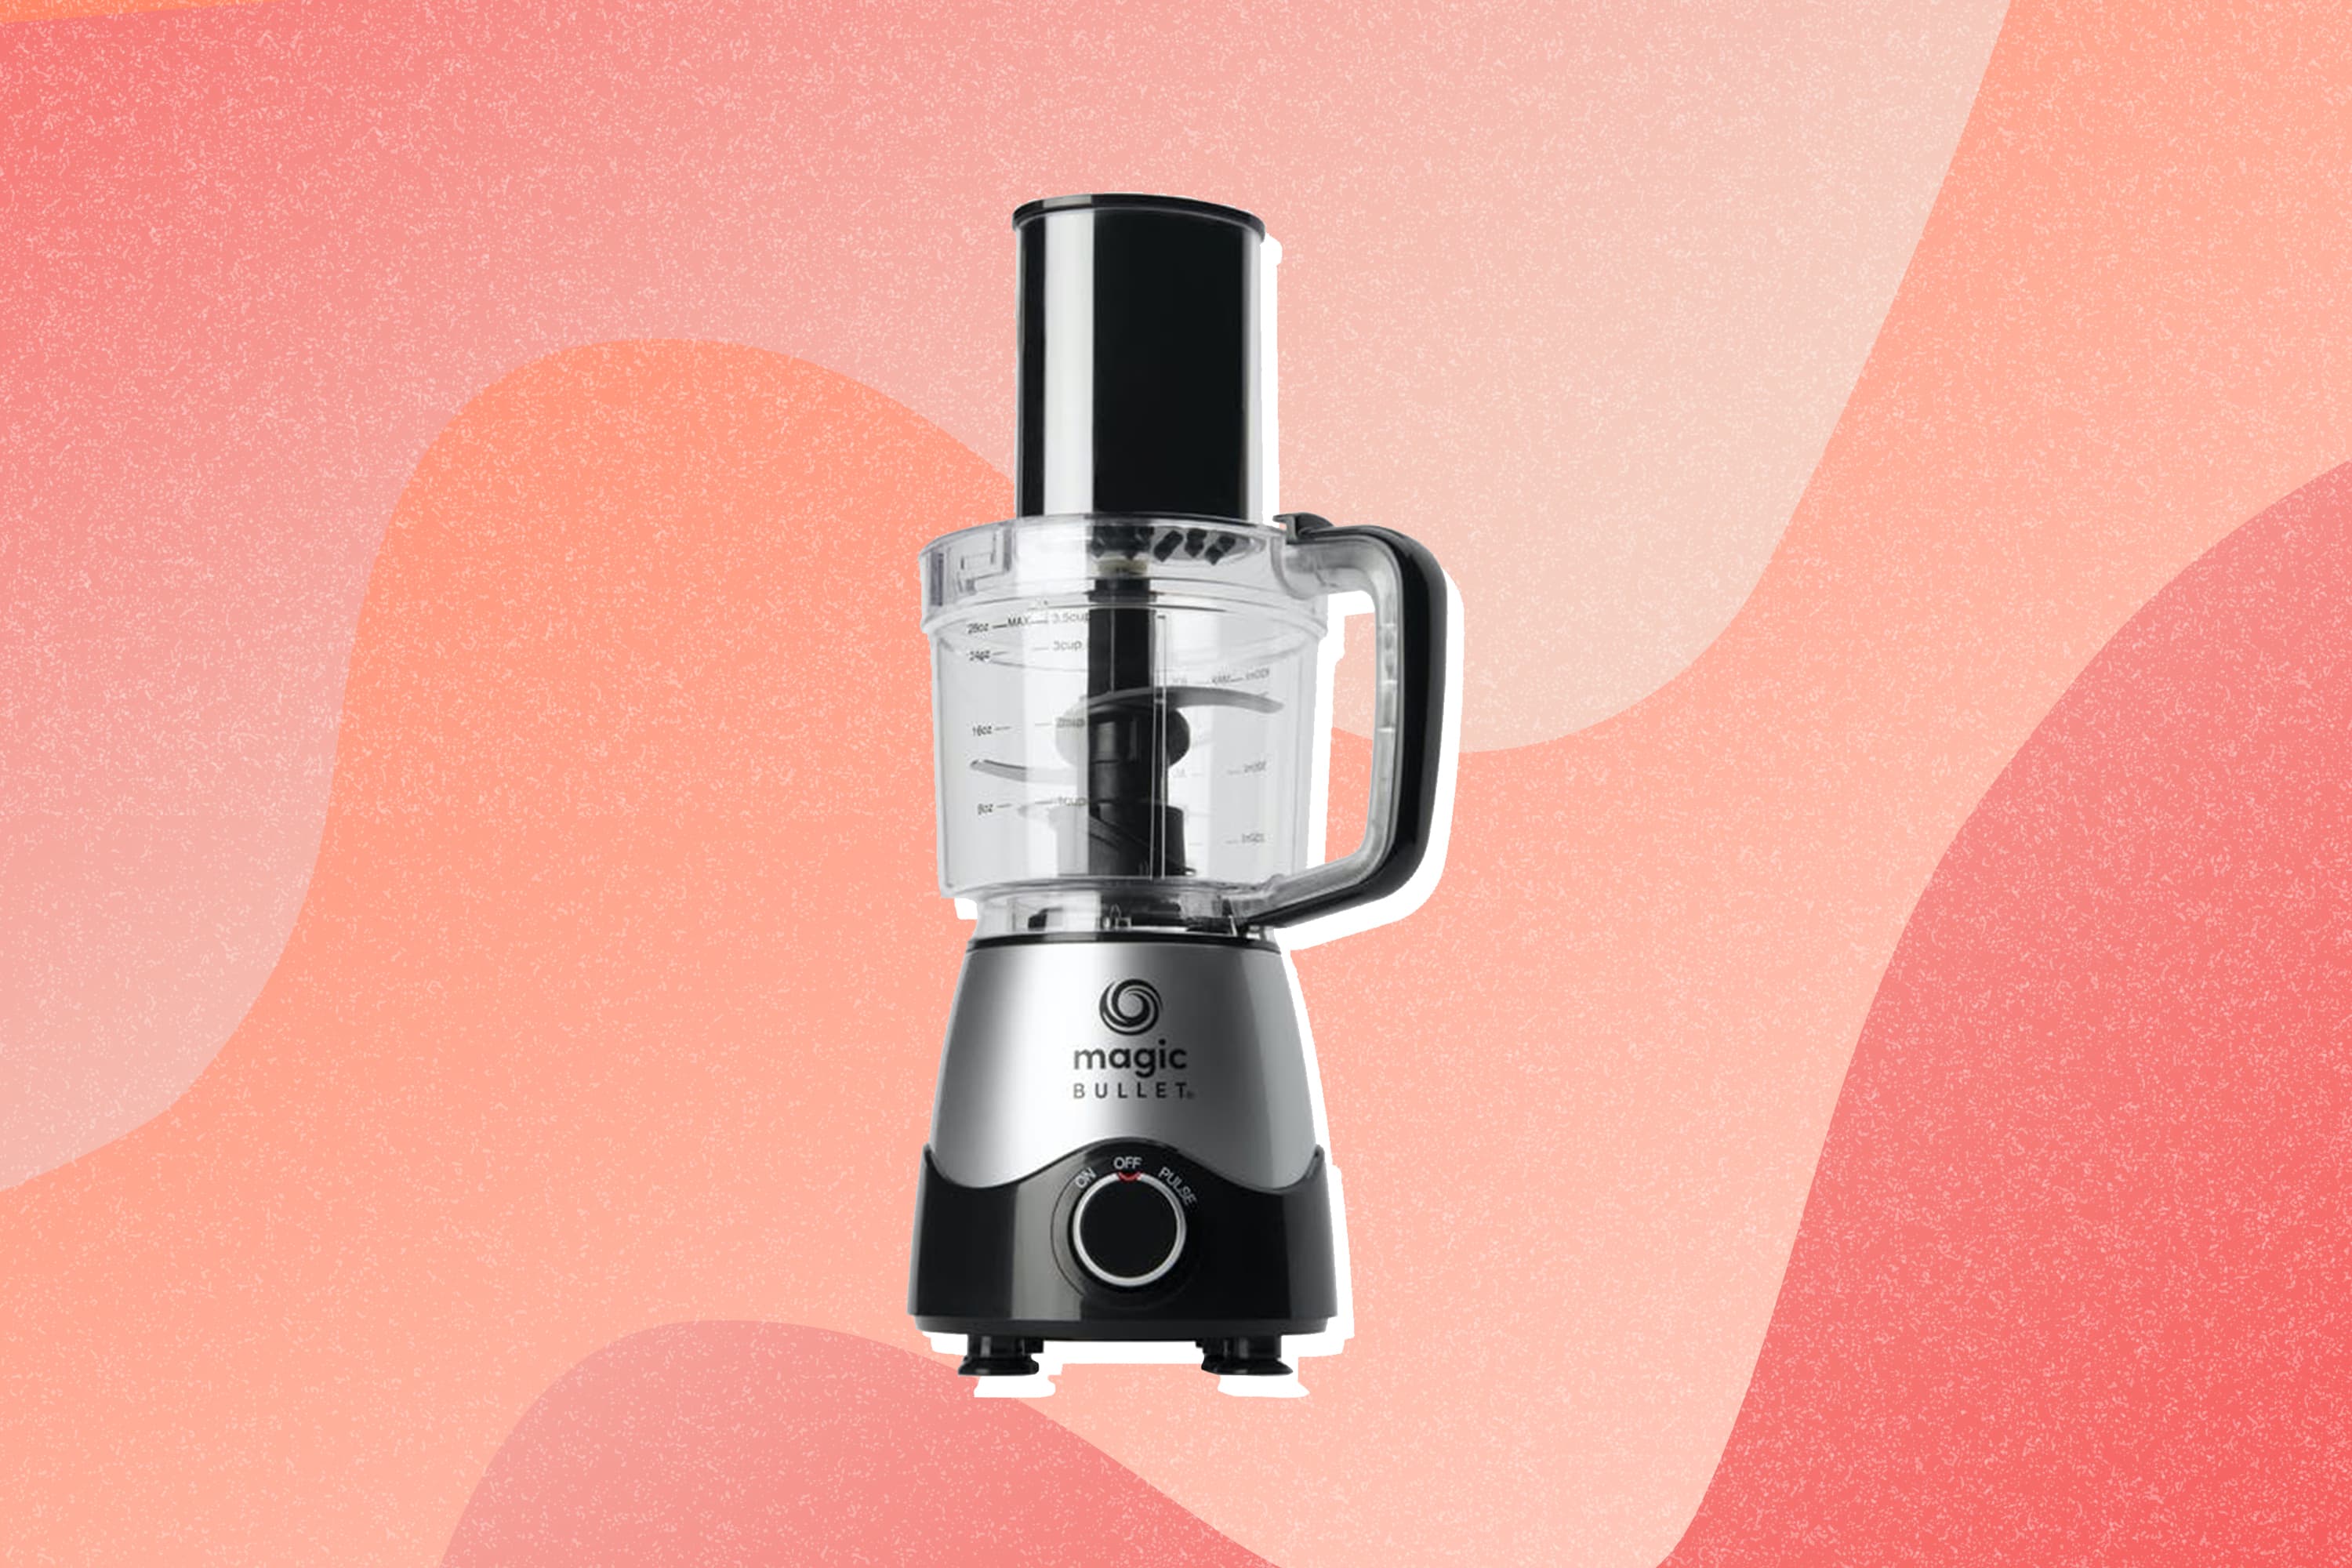 Veggie Bullet: is the Nutribullet food processor any good? - Which? News